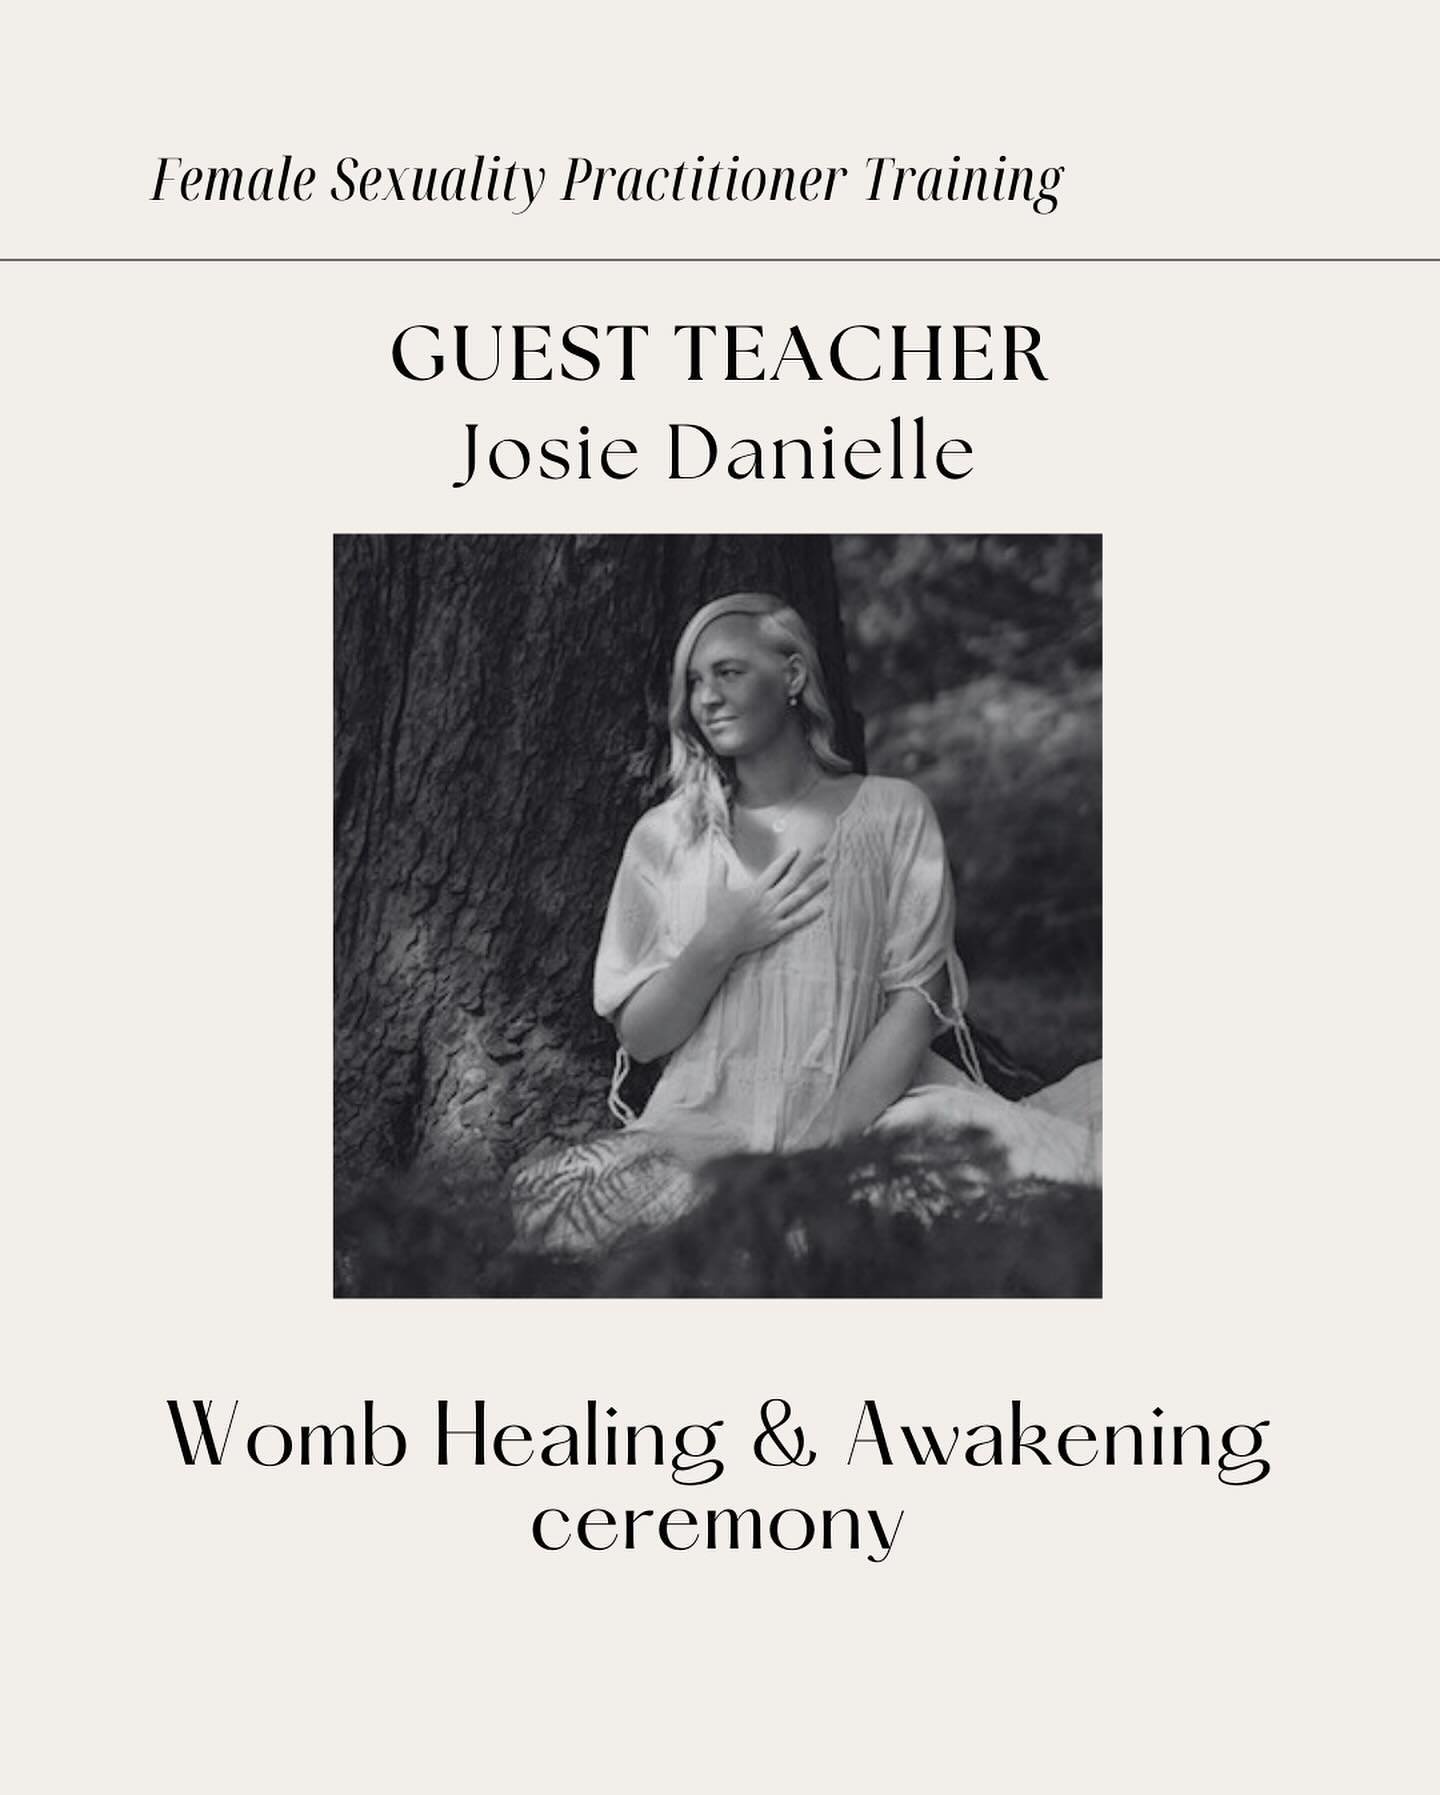 Introducing our first guest teacher on the next round of the Female Sexuality Practitioner training @josiedaniellehealing .

Josie and I met back in 2018 when we both worked at @remindstudio , we bonded over spiritual chats and giggled over nothingne